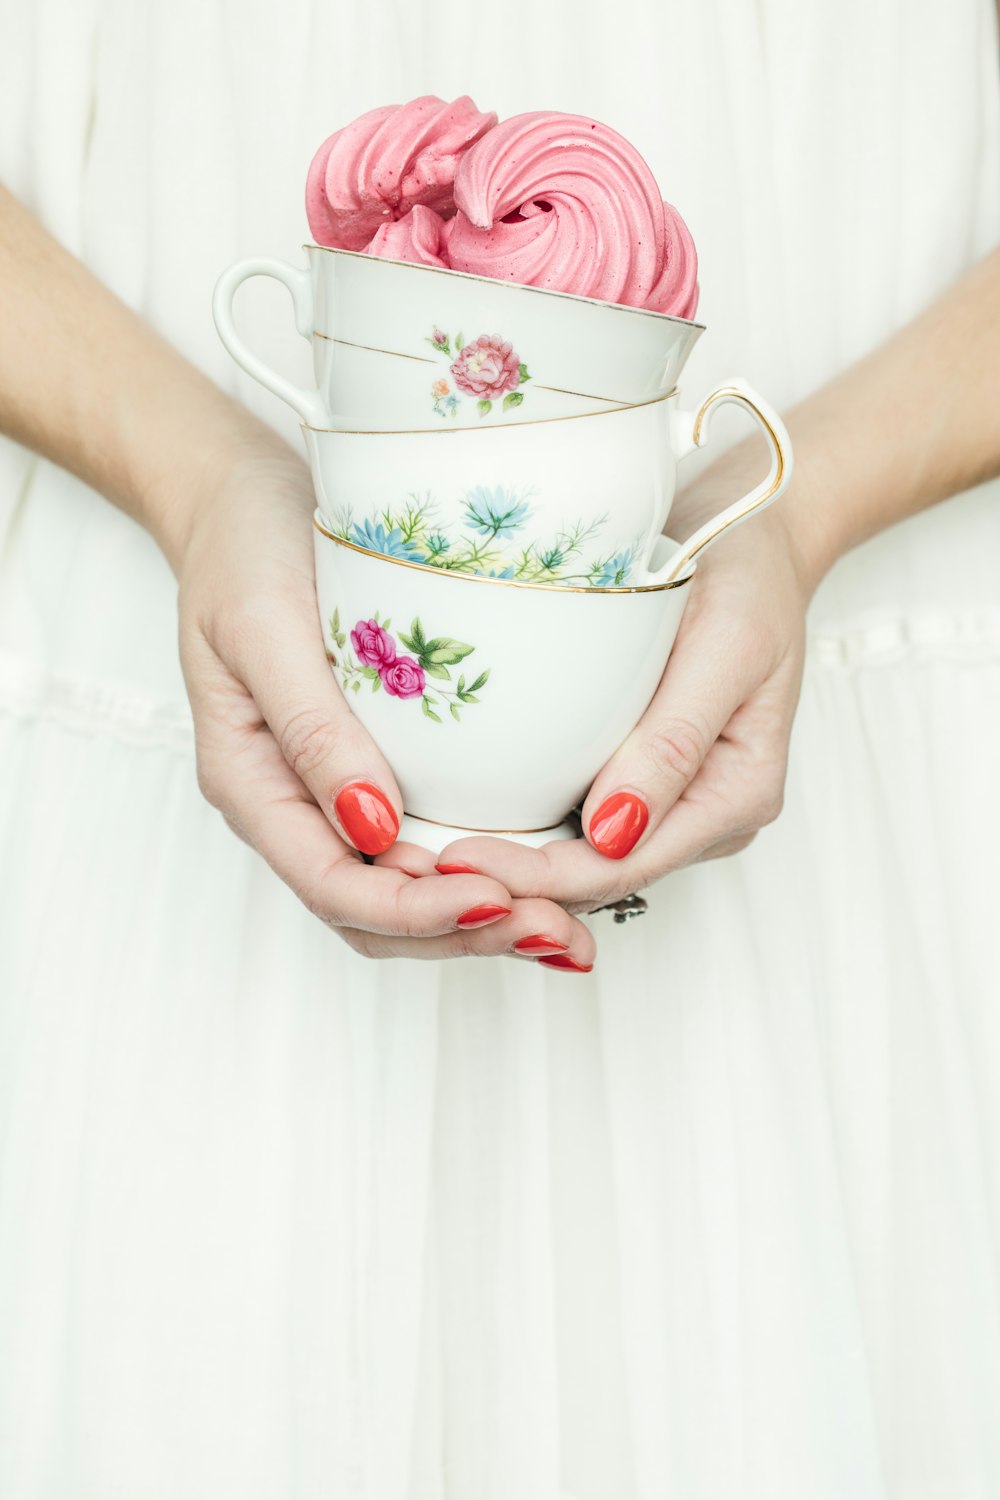 person holding three floral ceramic teacup